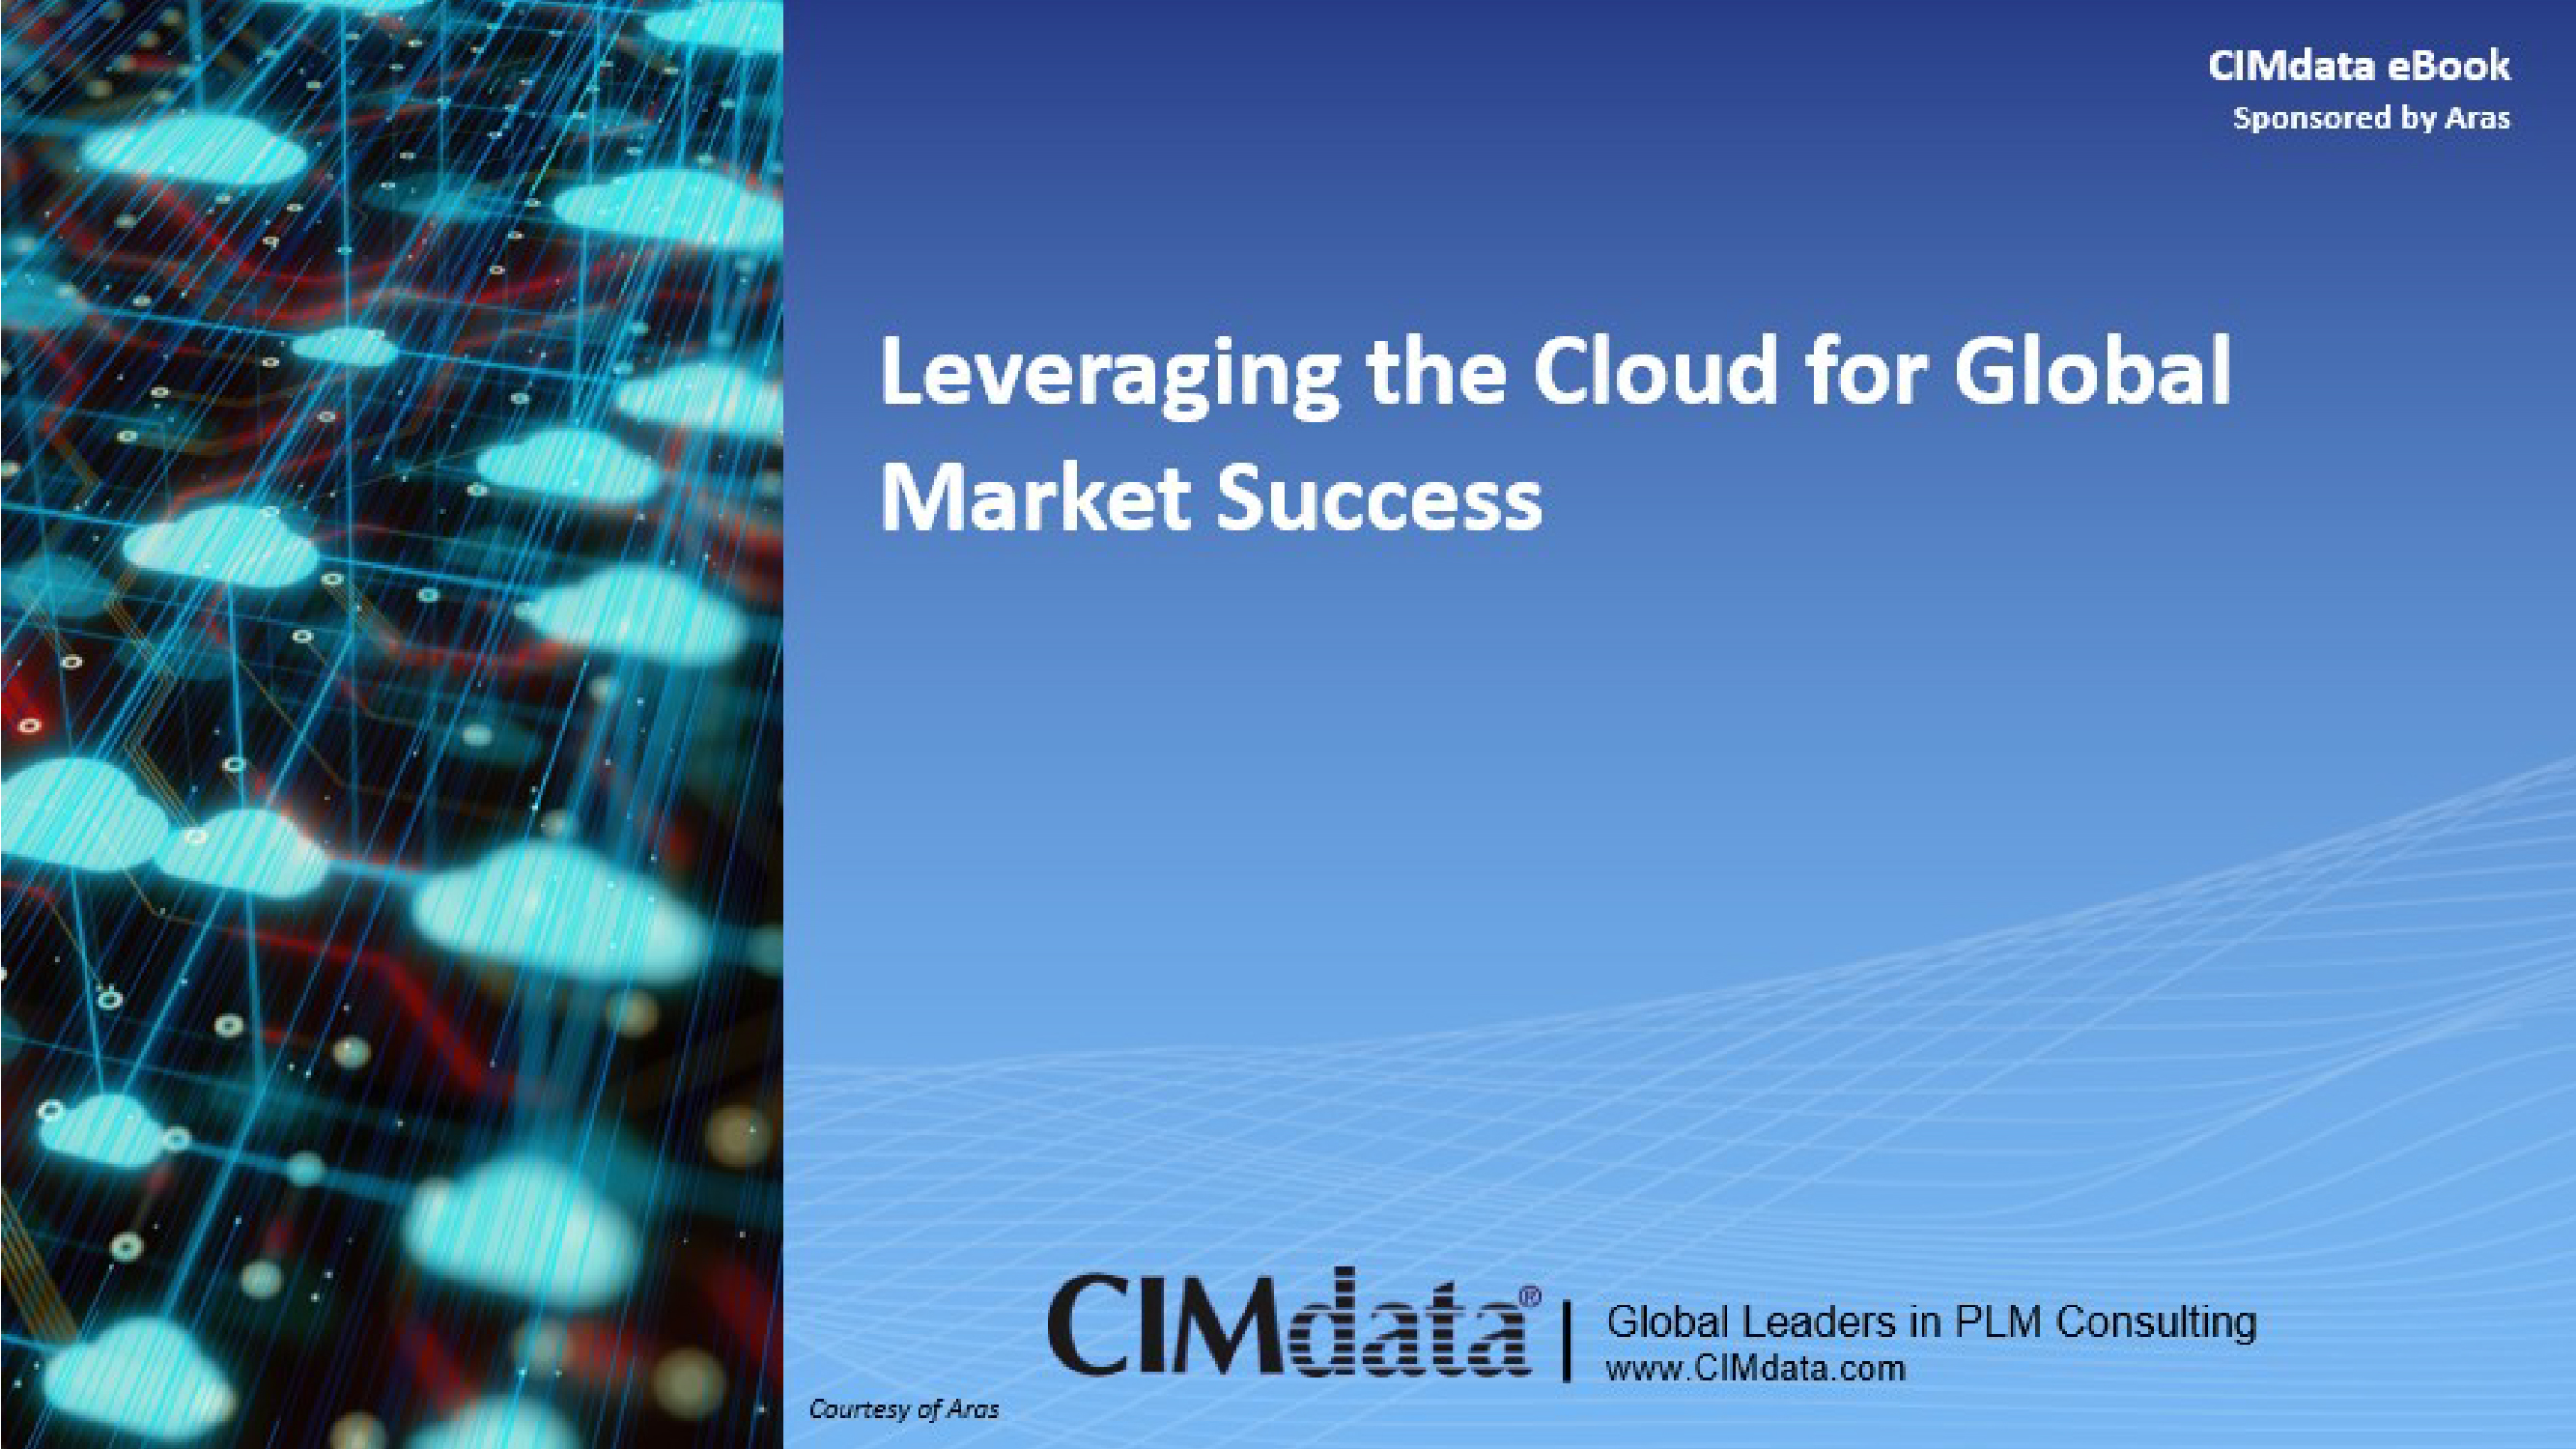 Leveraging the cloud for global market success